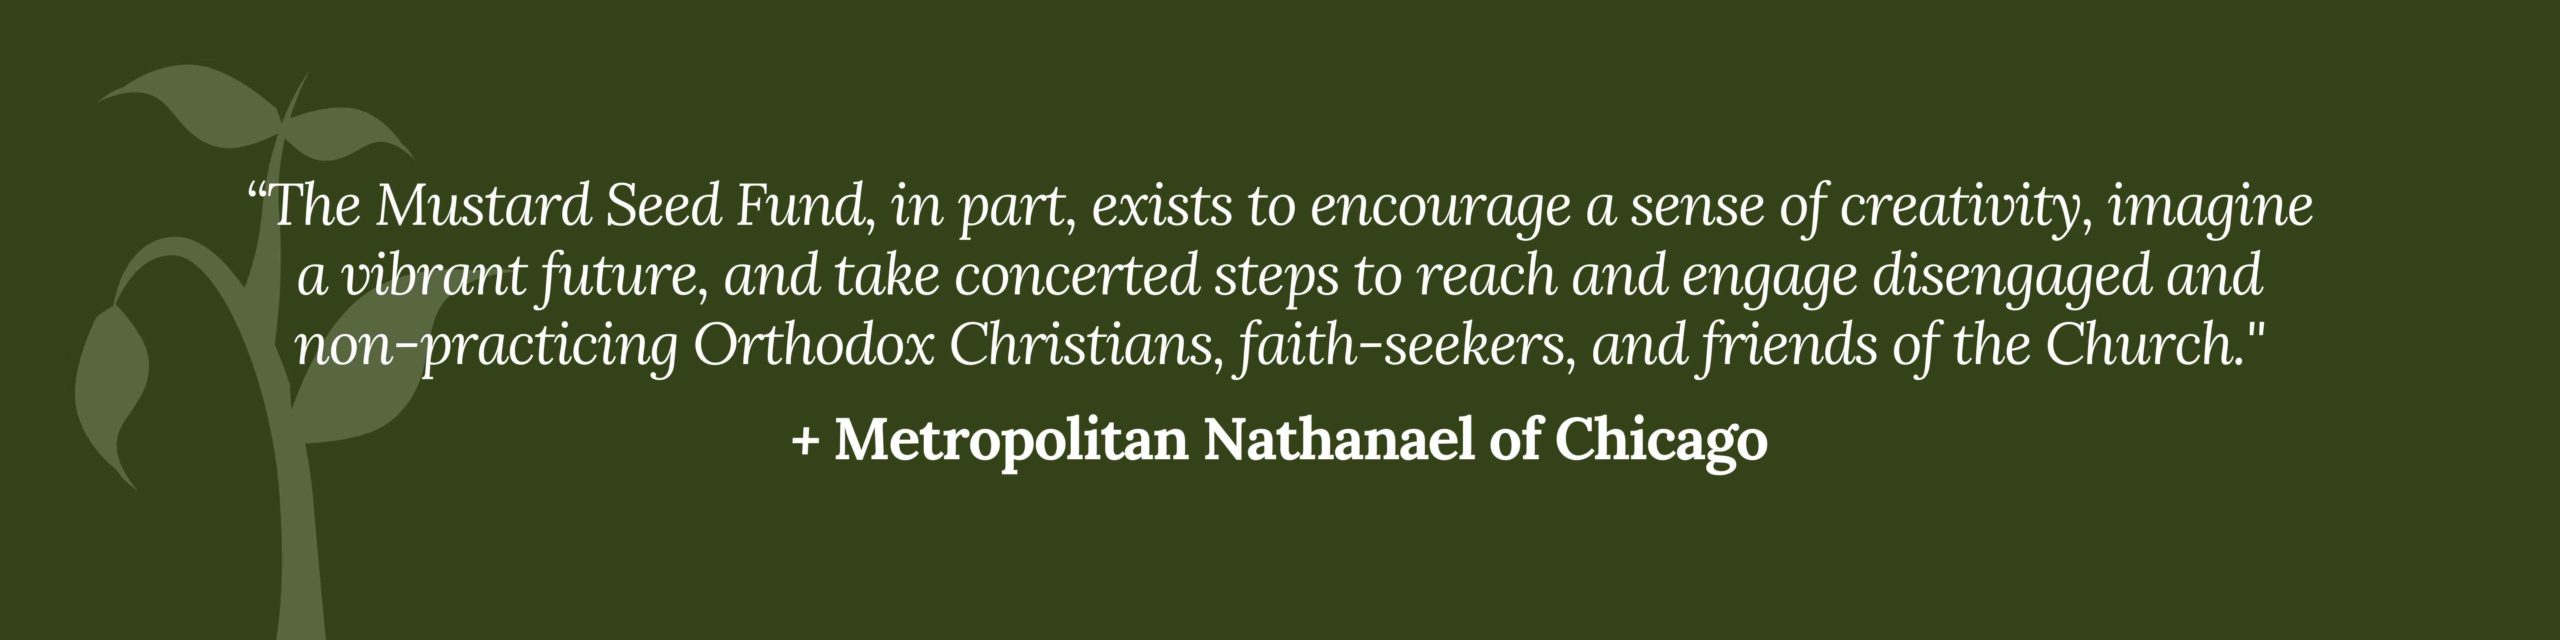 Metropolitan-Nathanael-Mustard-Seed-Fund-Quote-Green-V2-scale